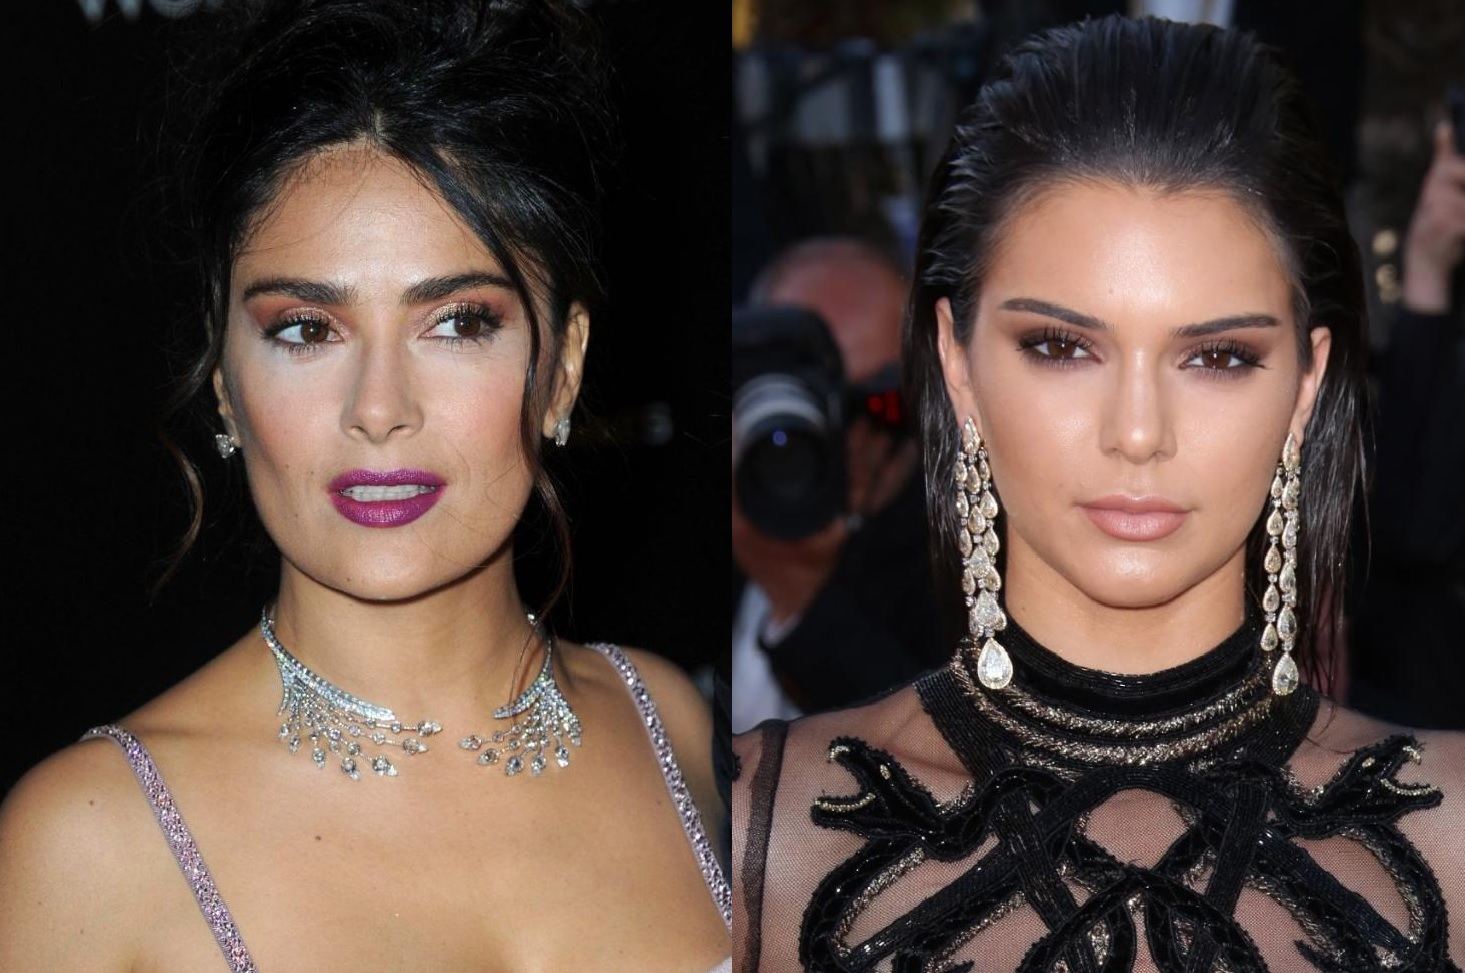 Cannes Jewelry from Salma Hayek and Kendall Jenner